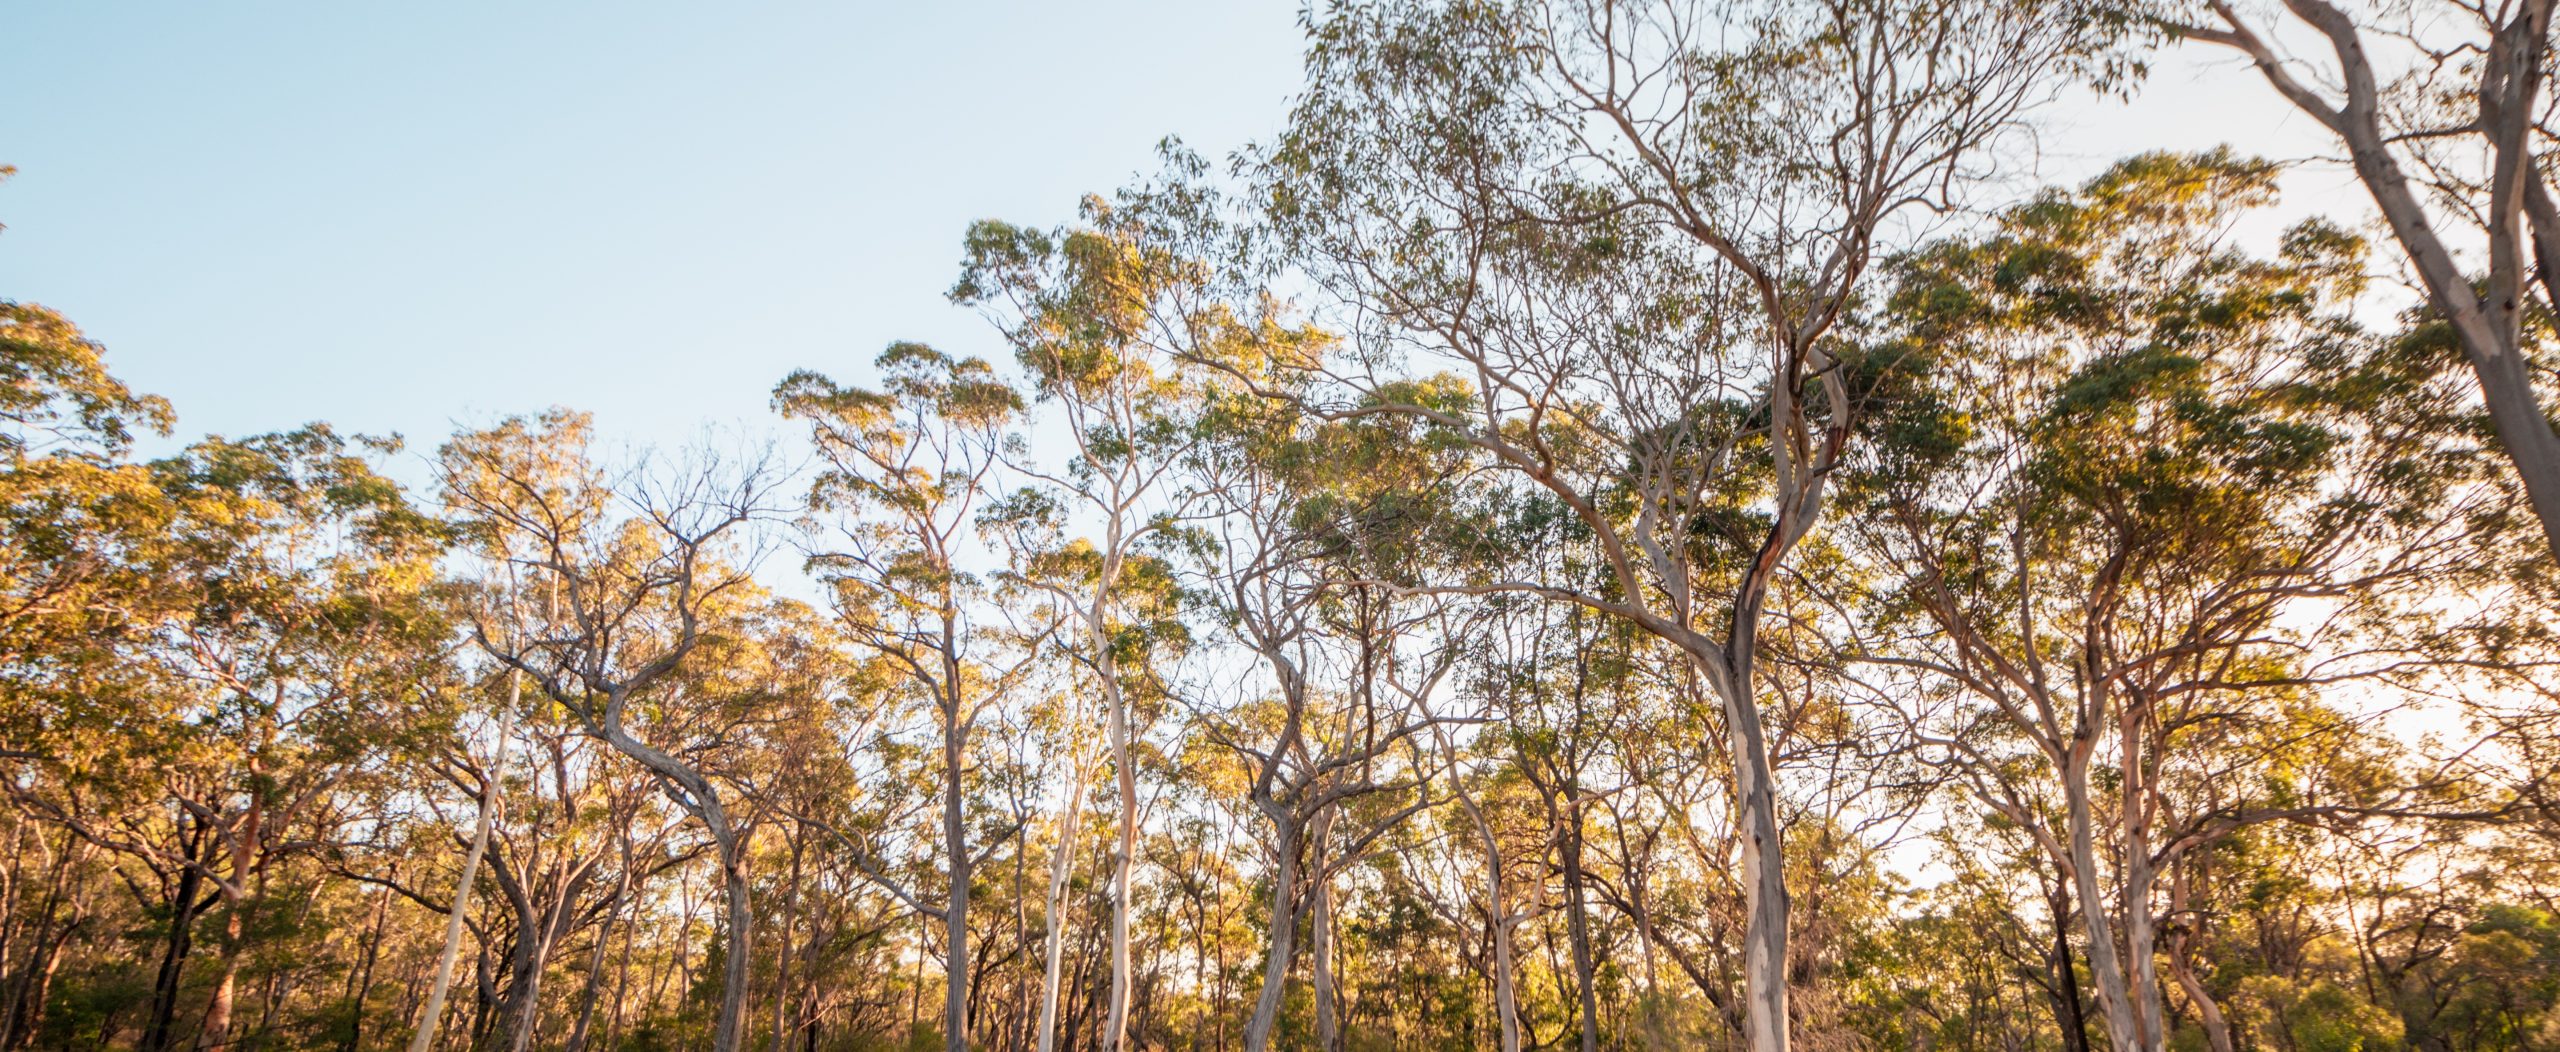 The three ops of lush gum trees bordering Long Point Conference Centre, a meeting venue in Sydney